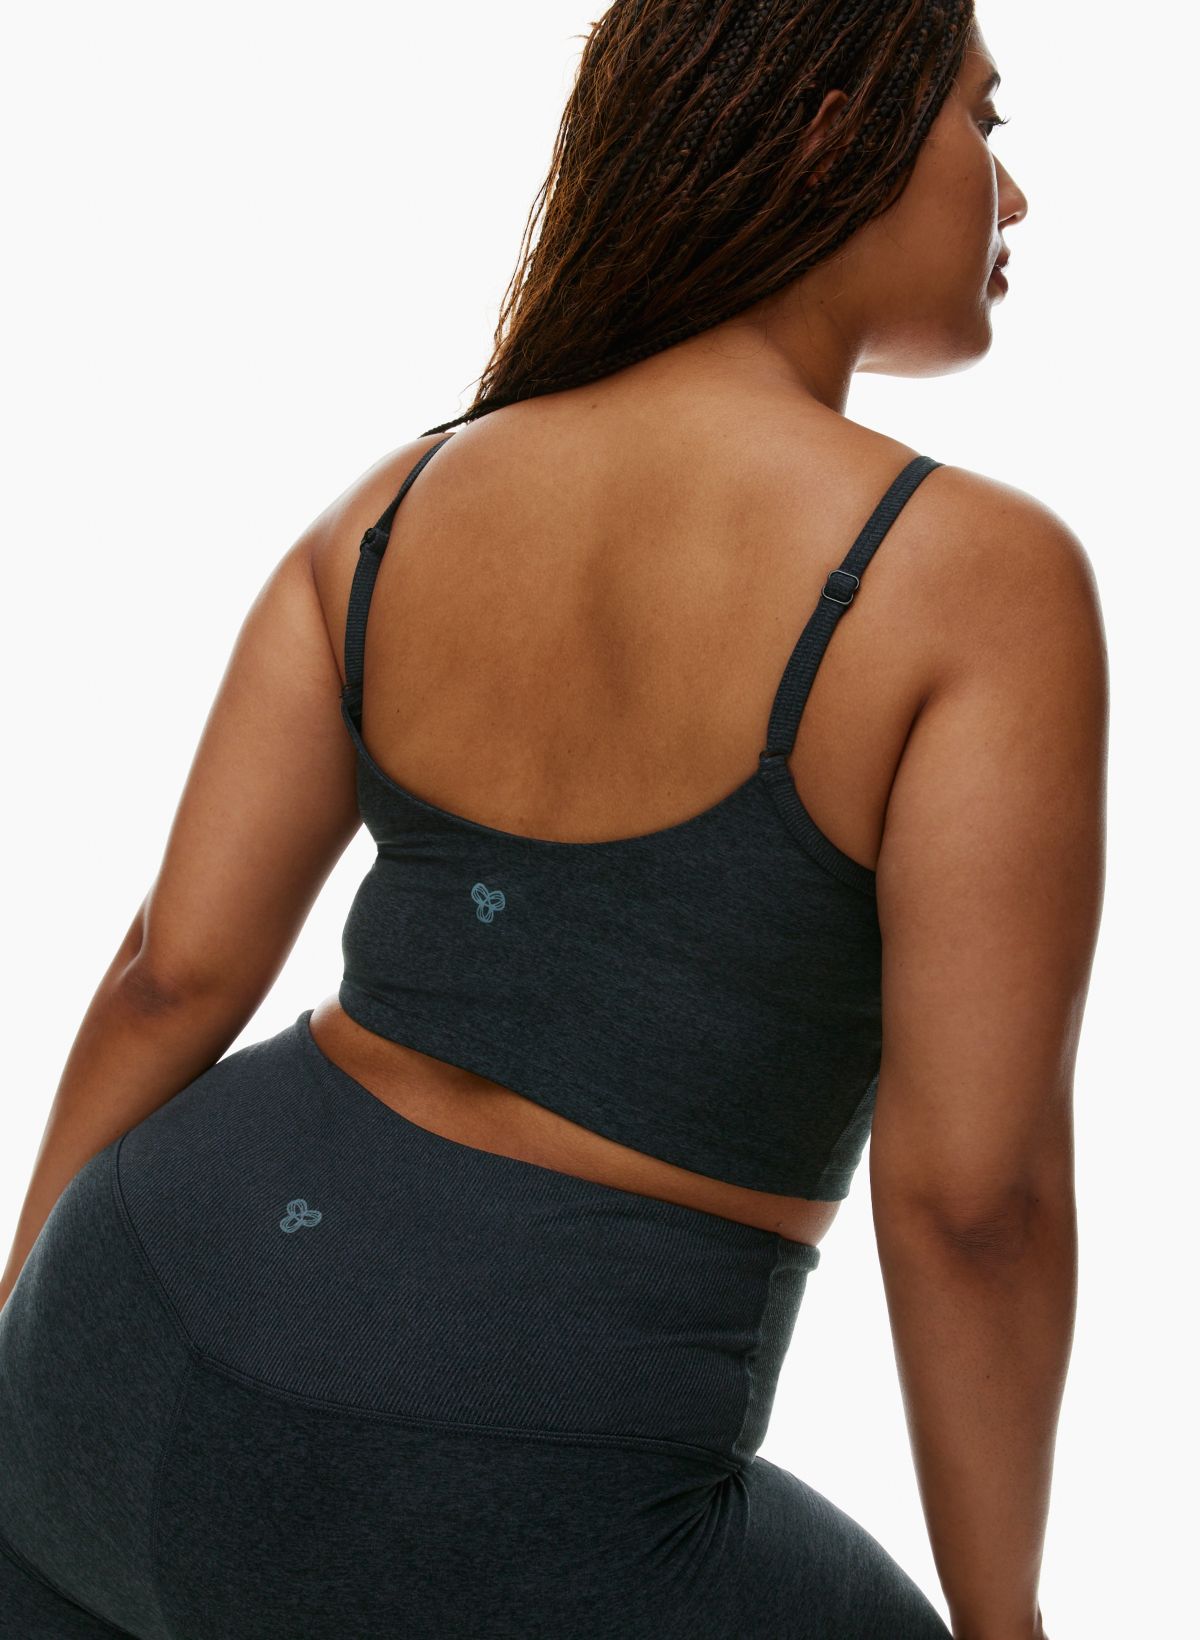 Cheata Women's Trotter Tank w/ Built In Sports Bra - Turquoise/Black -  Cheata-469868-Turquoise/Black - Tack Of The Day